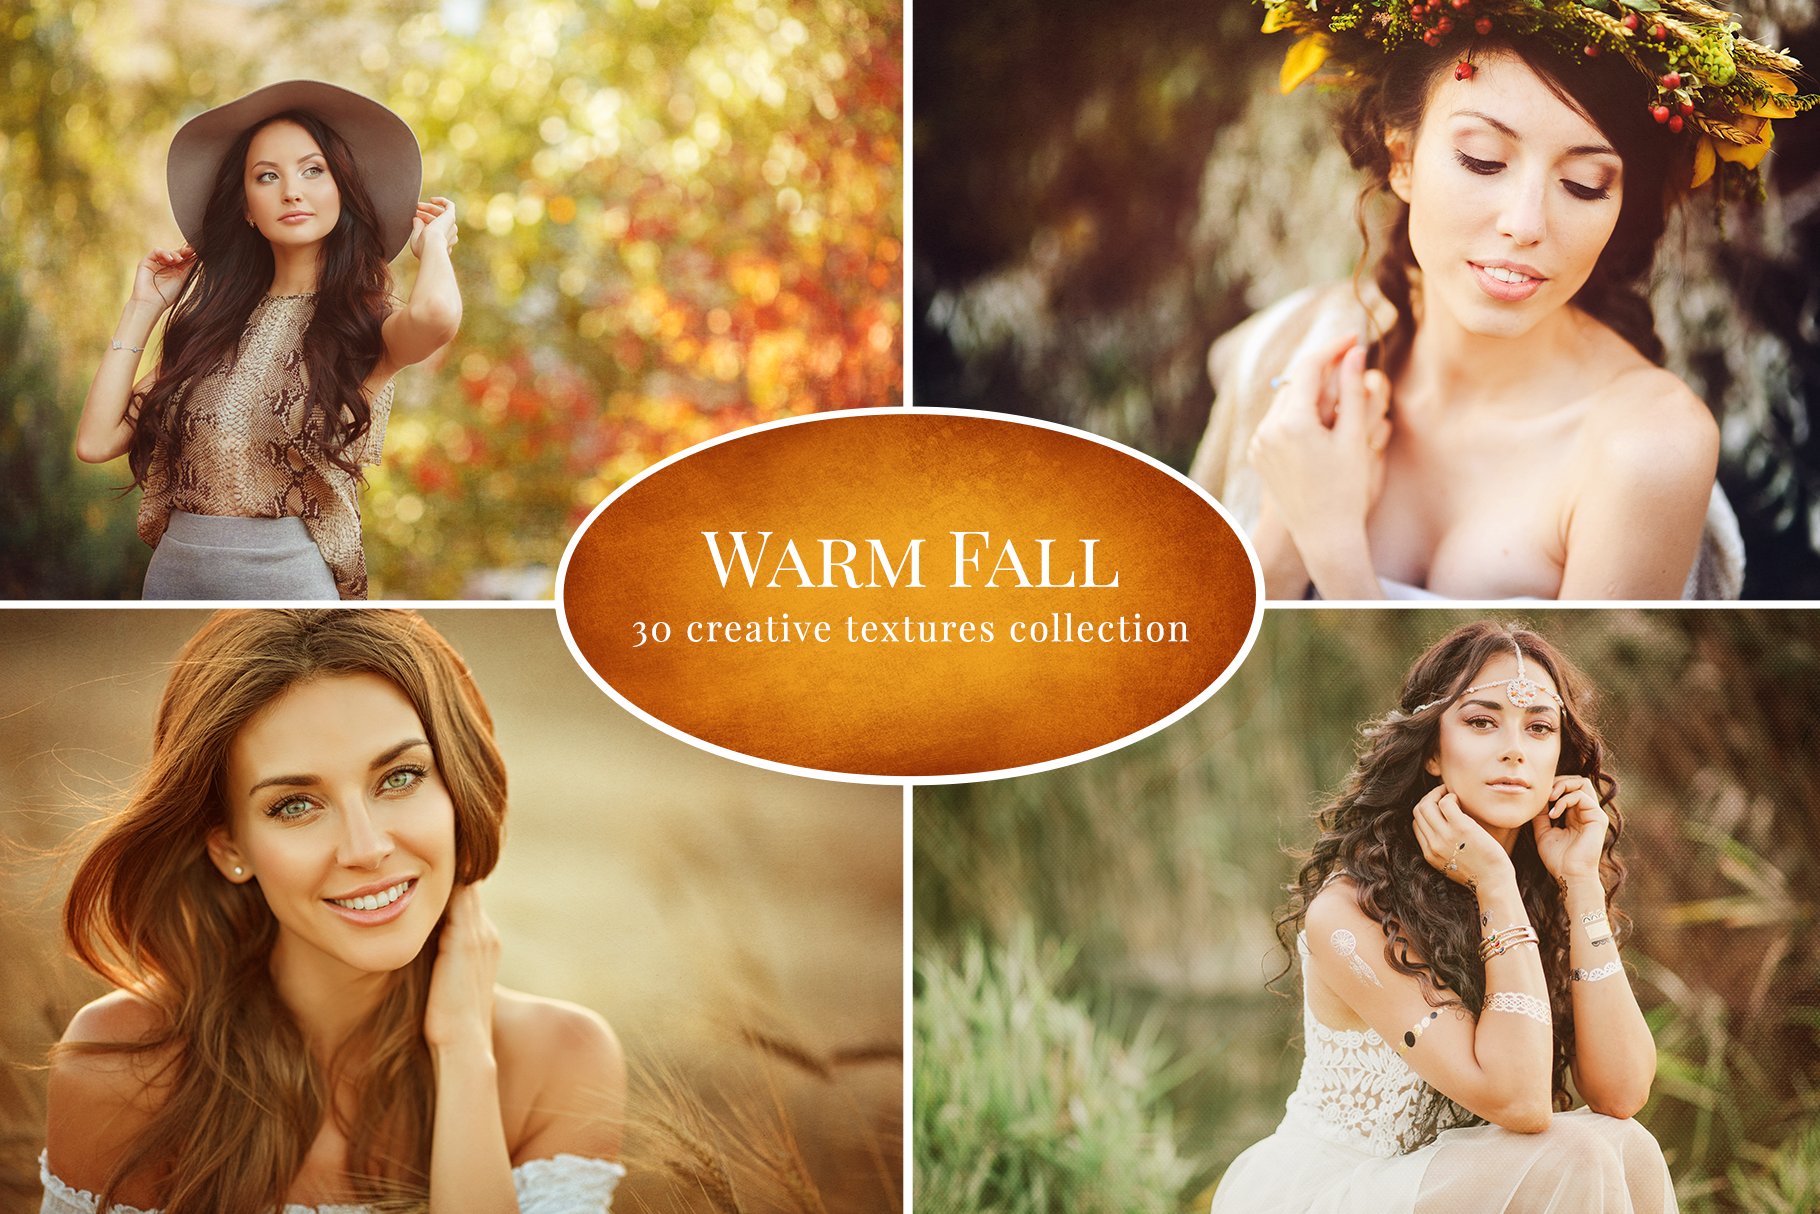 Warm Fall Textures collectioncover image.